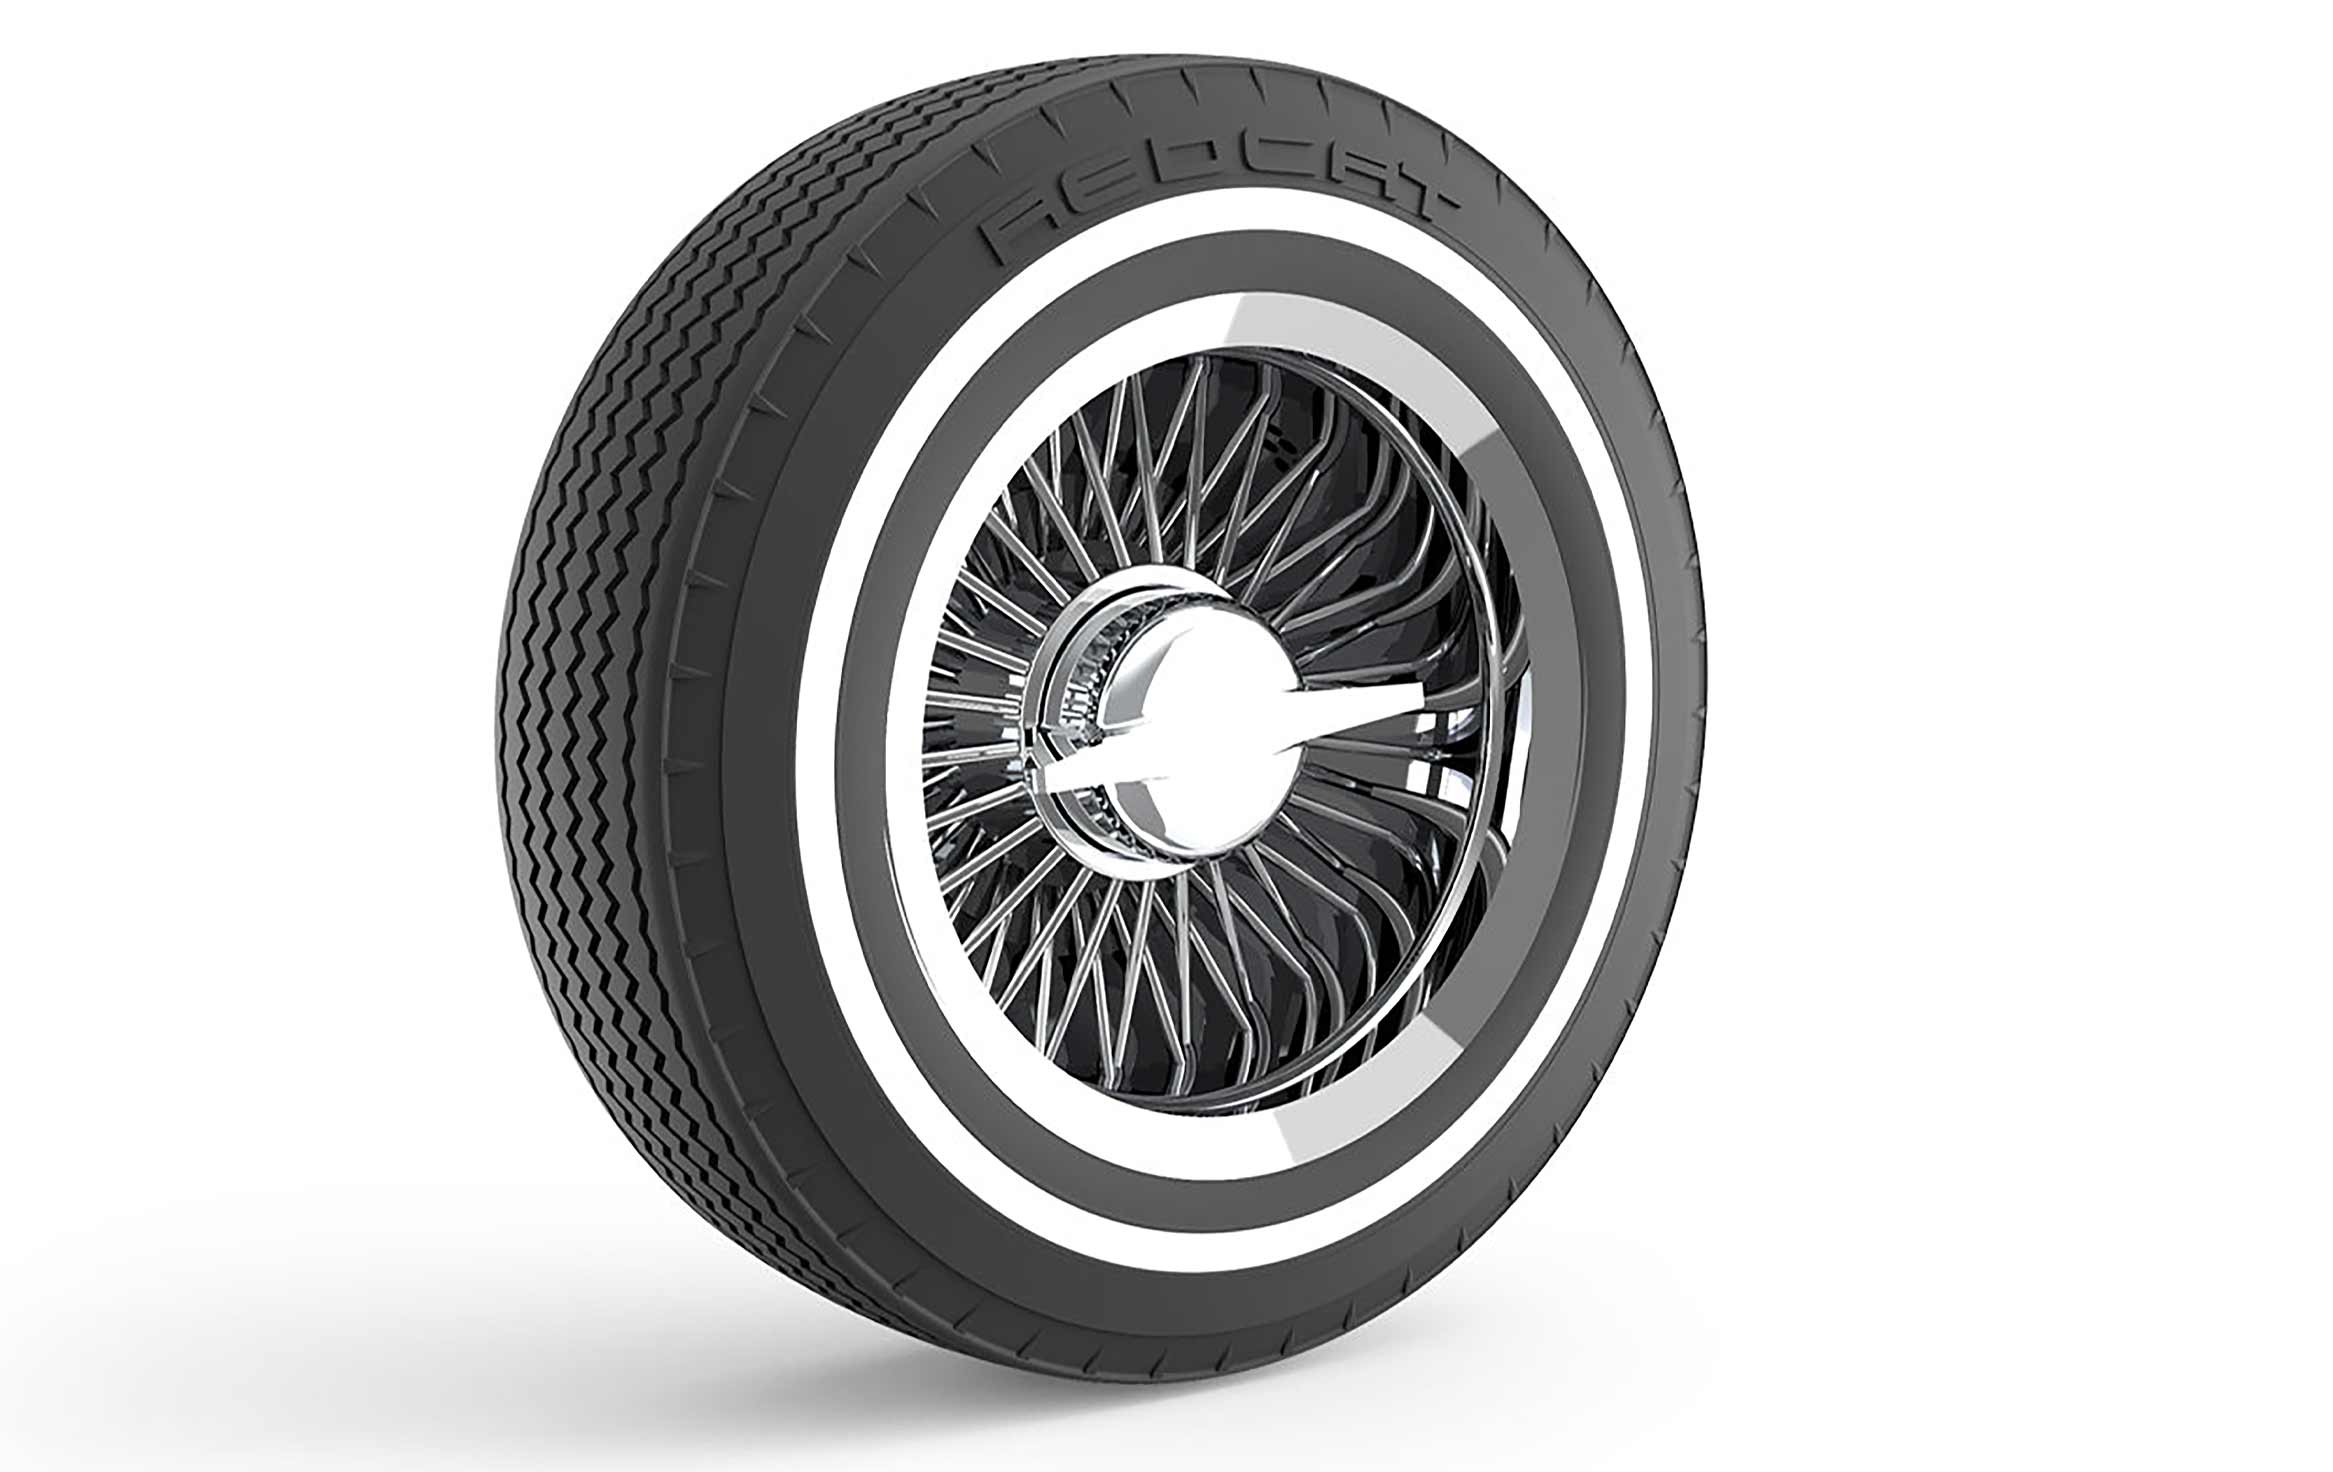 Scale 14 Inch Spoked Wheels With Low-Profile Tires